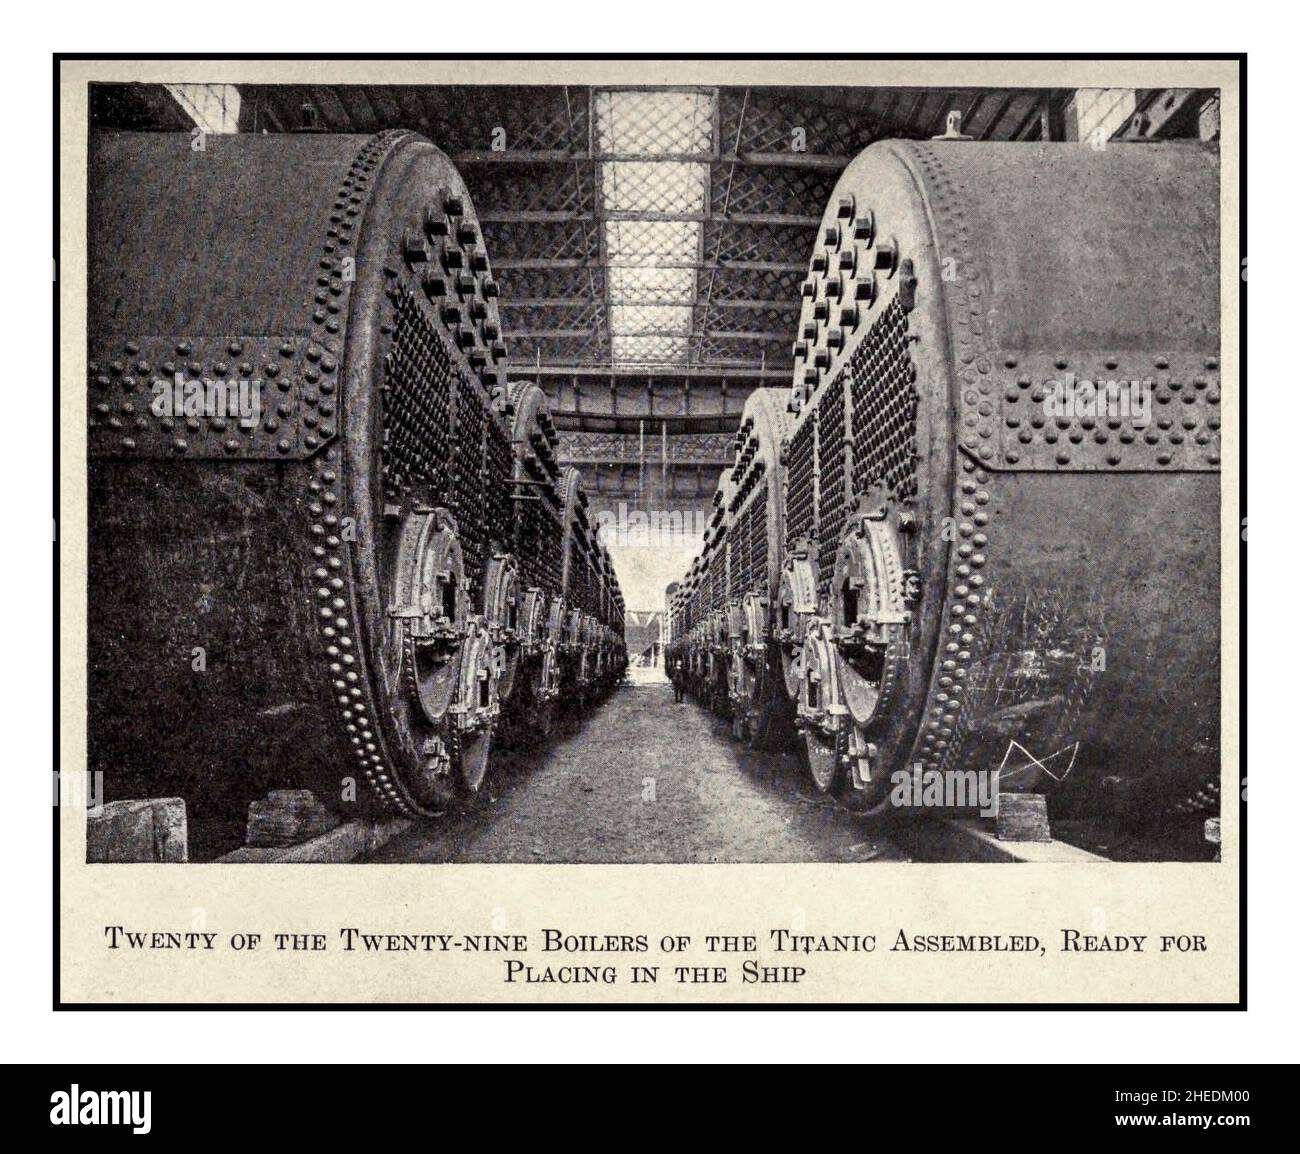 Titanic boilers assembled and ready for installation into RMS Titanic vintage archive image 1900s Harland and Wolff shipyard RMS Titanic was the largest ship afloat at the time she entered service and the second of three Olympic-class ocean liners operated by the White Star Line. She was built by the Harland and Wolff shipyard in Belfast. Stock Photo